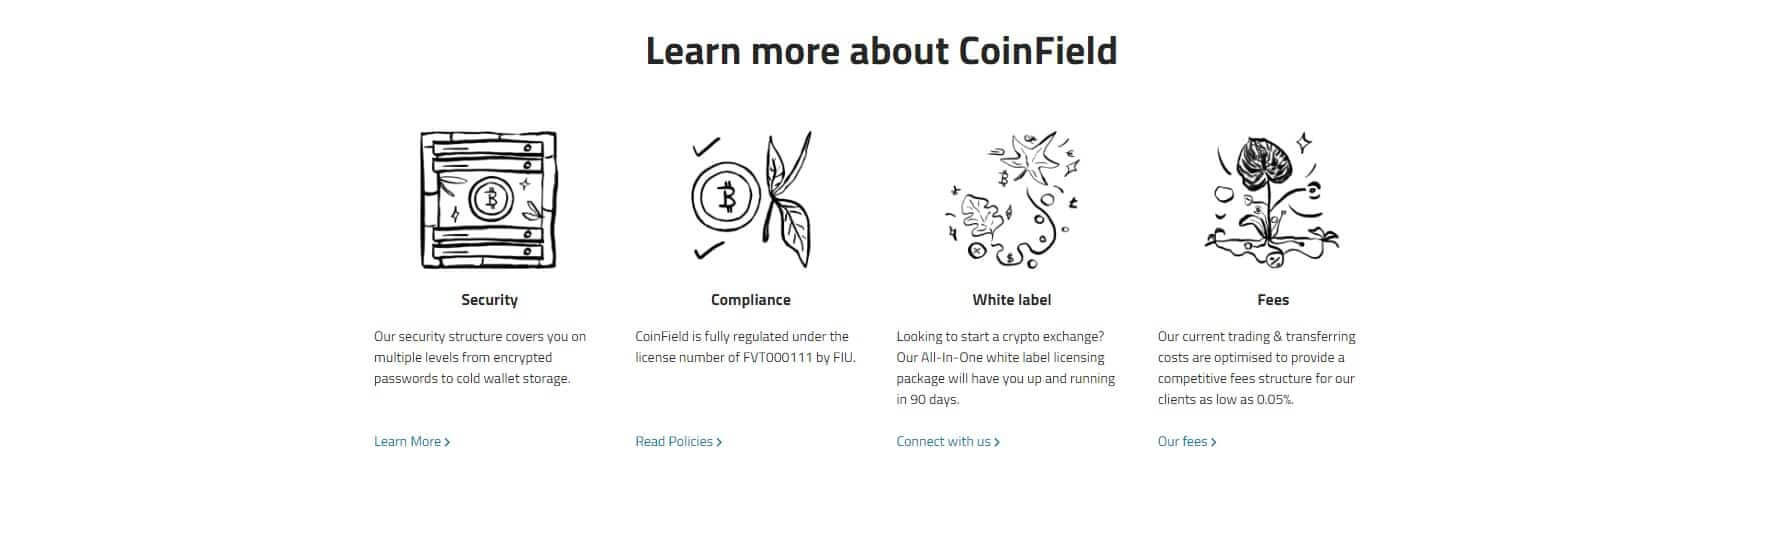 Learn more about Coinfield